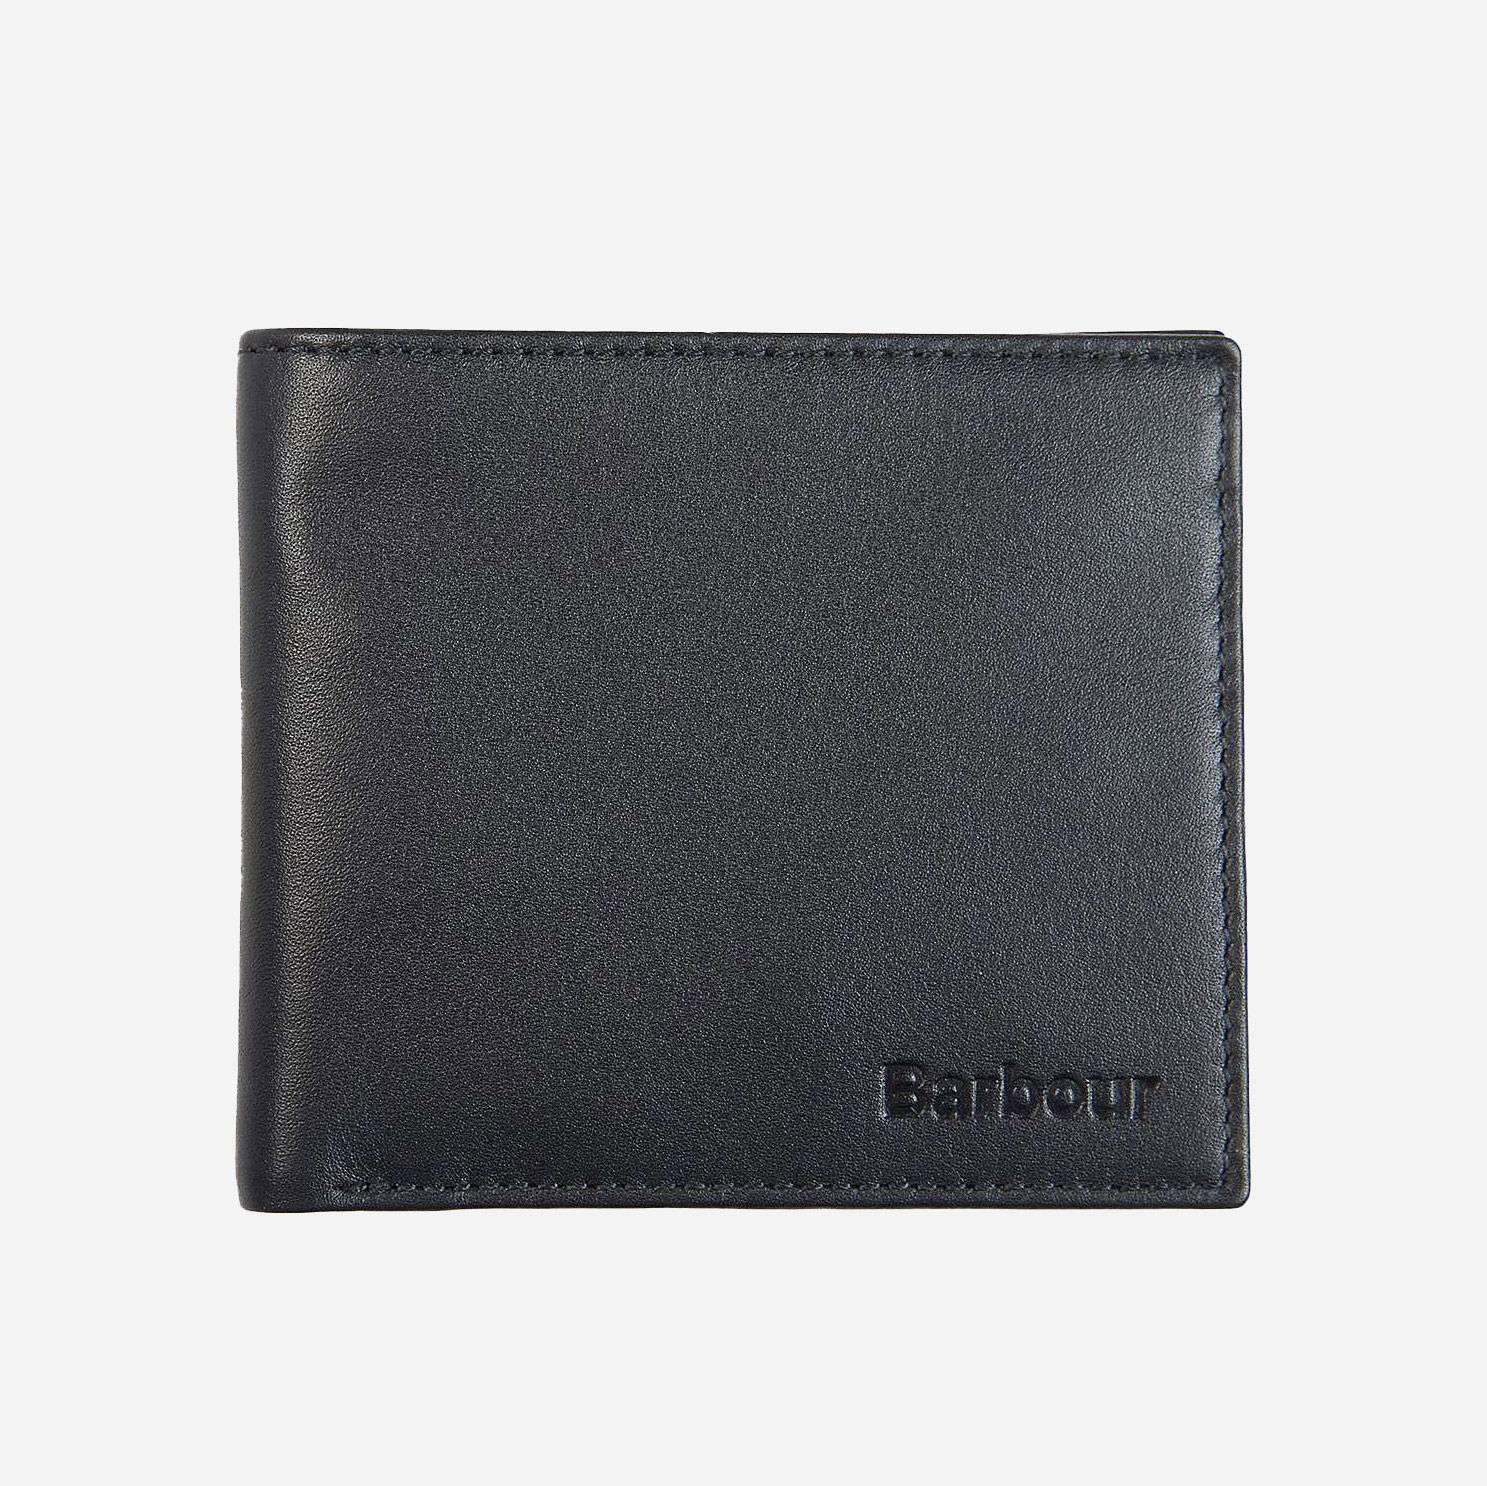 Barbour Colwell Leather Billfold Wallet - Black/Cordovan